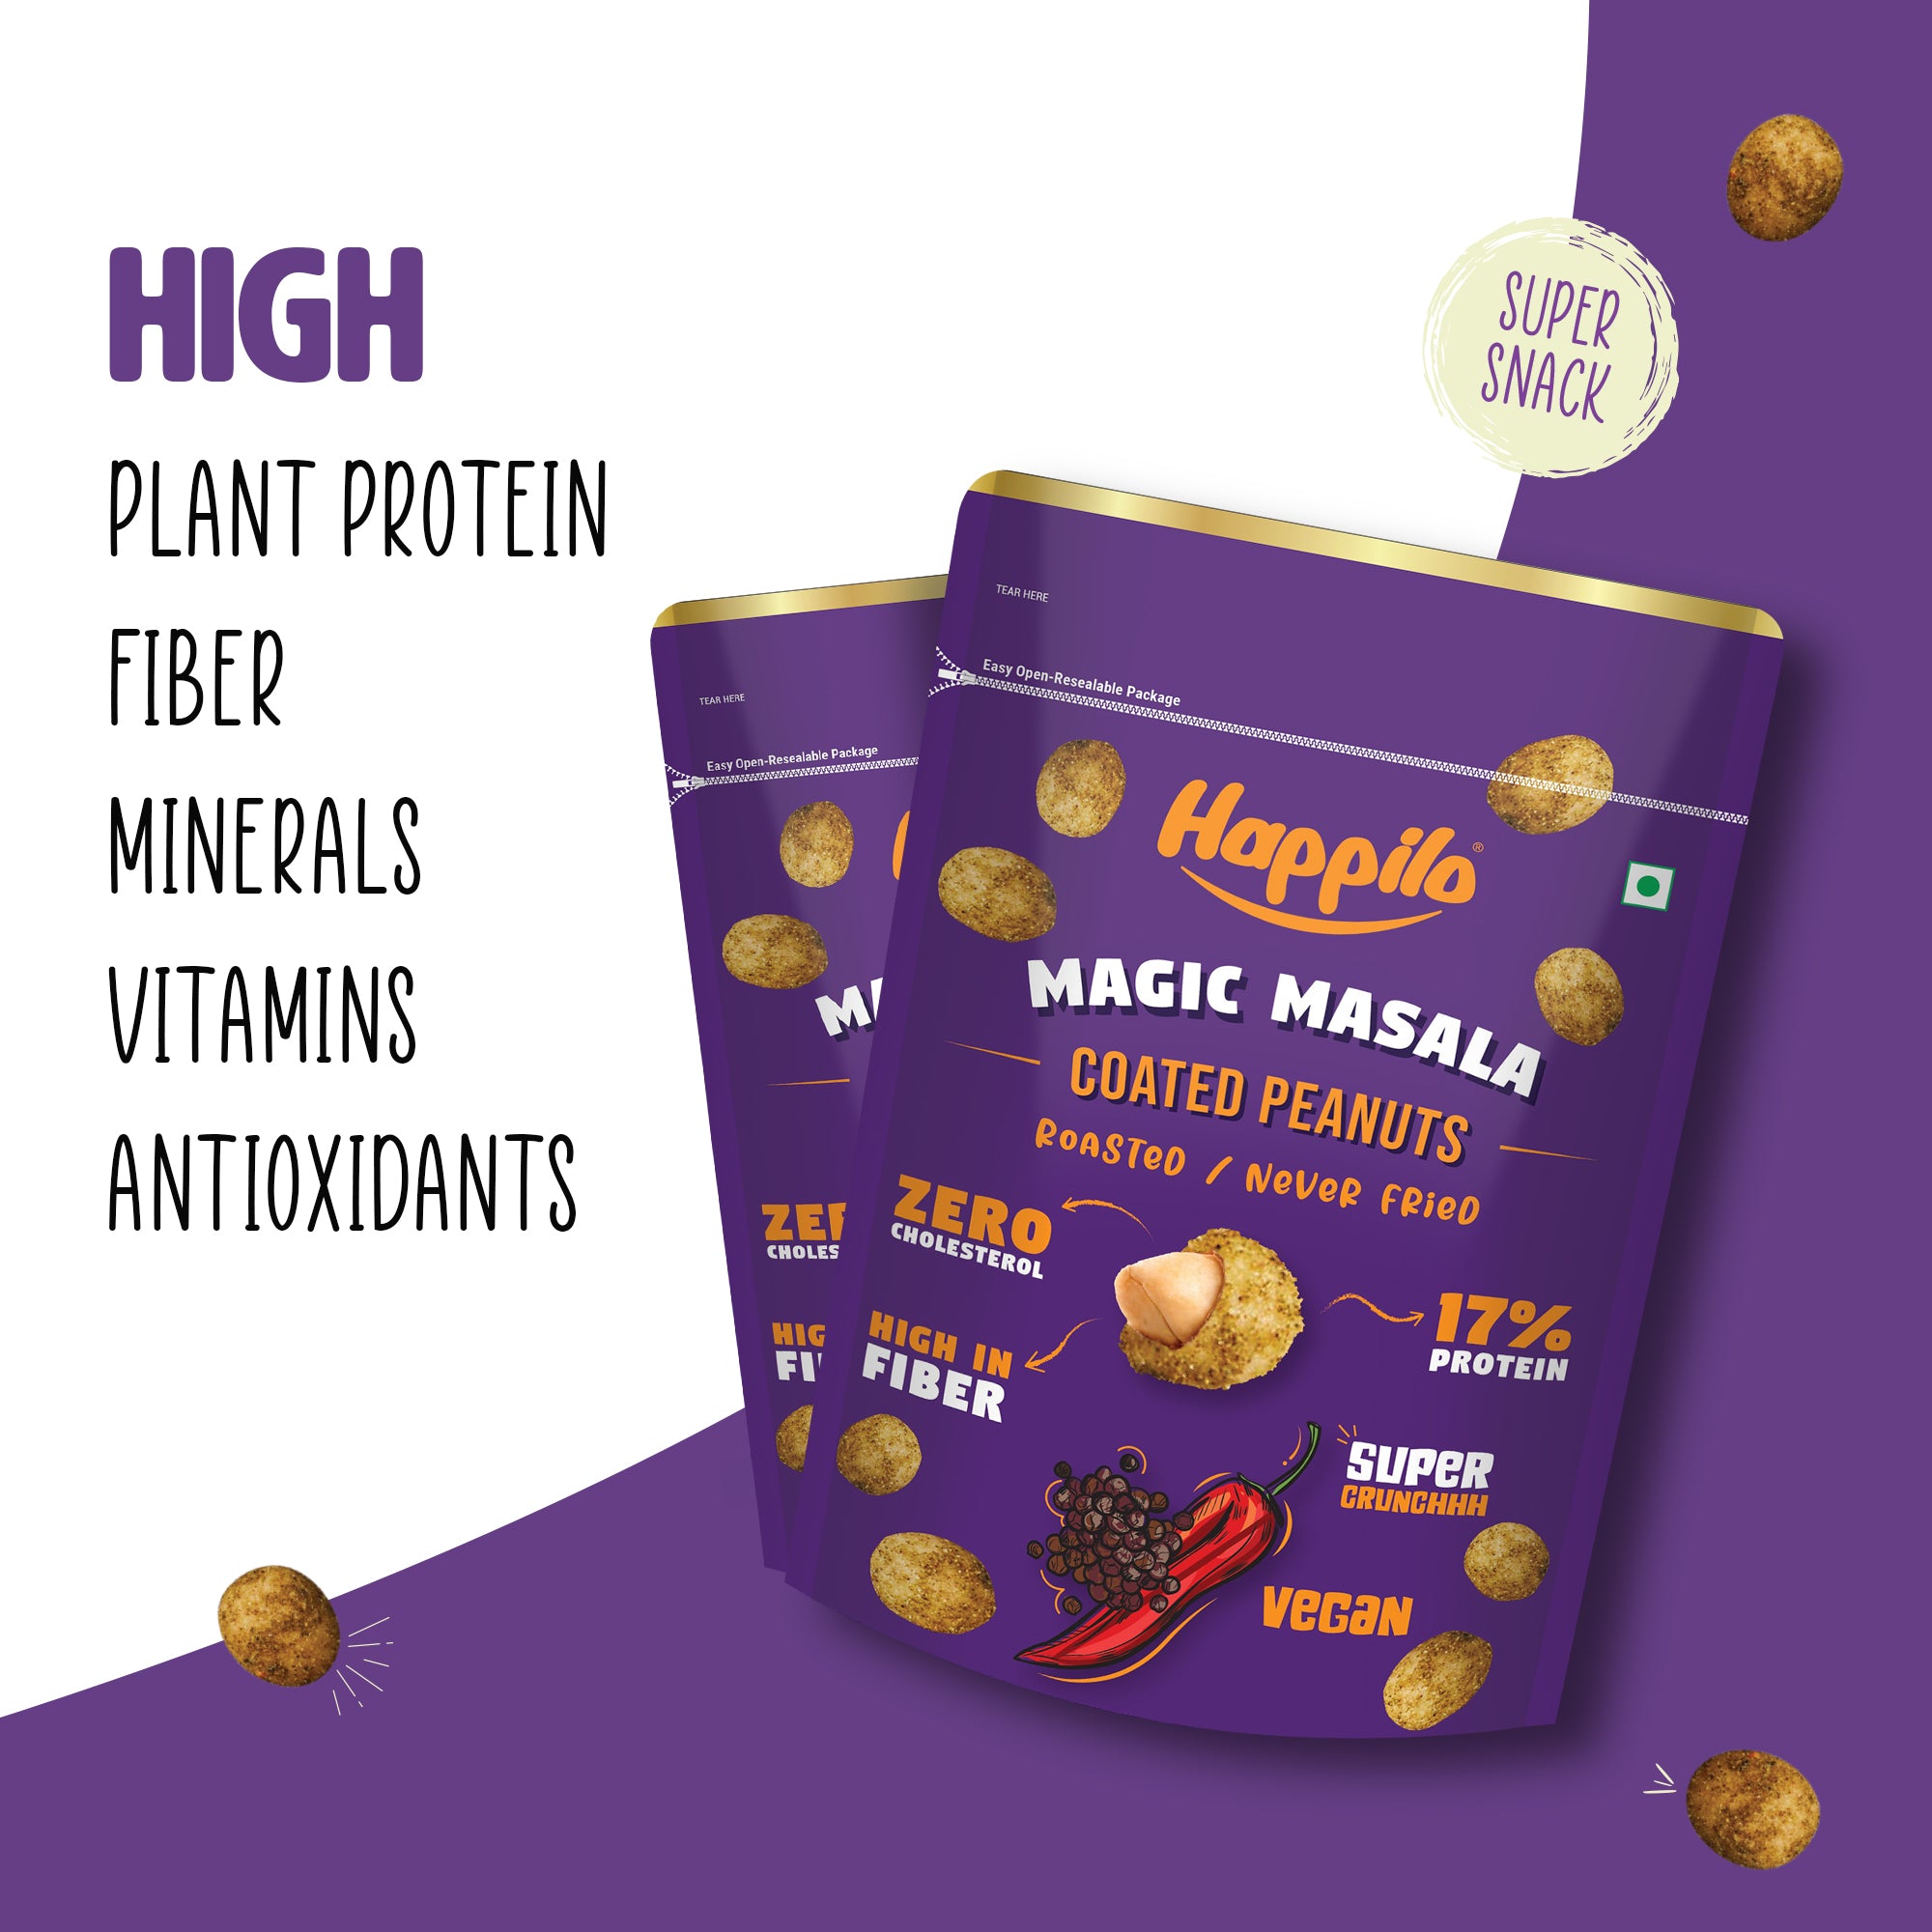 Happilo Premium Super Snack Magic Masala Peanut 150g, Crunchy and Nutty, High in Protein and Dietary Fibre